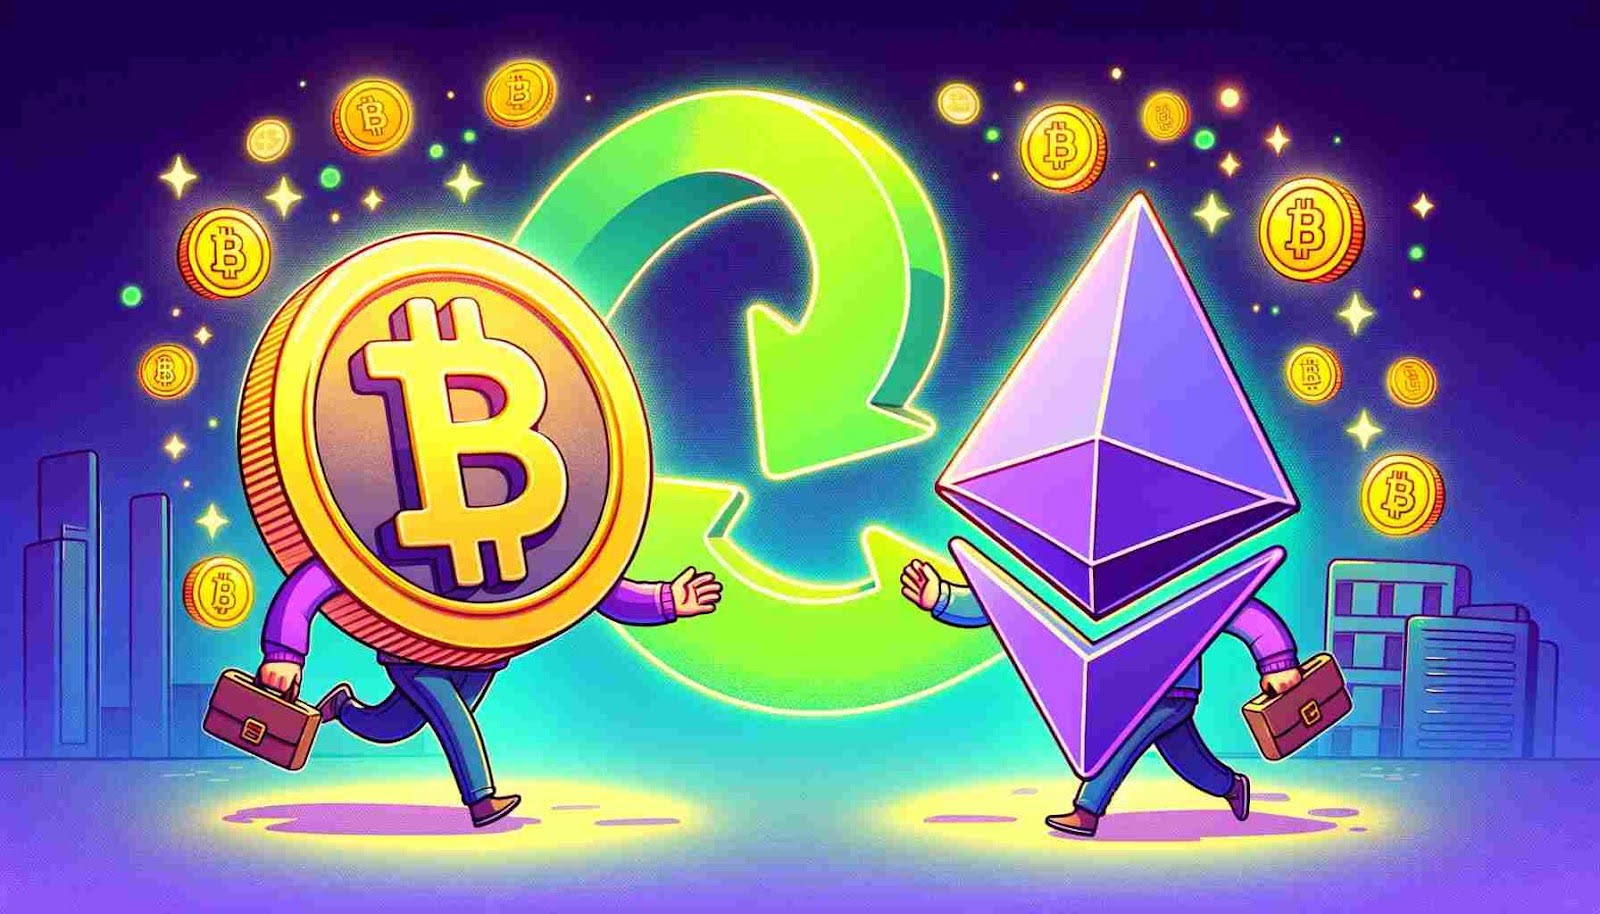 Bitcoin To Ethereum - The Road To Mass Adoption